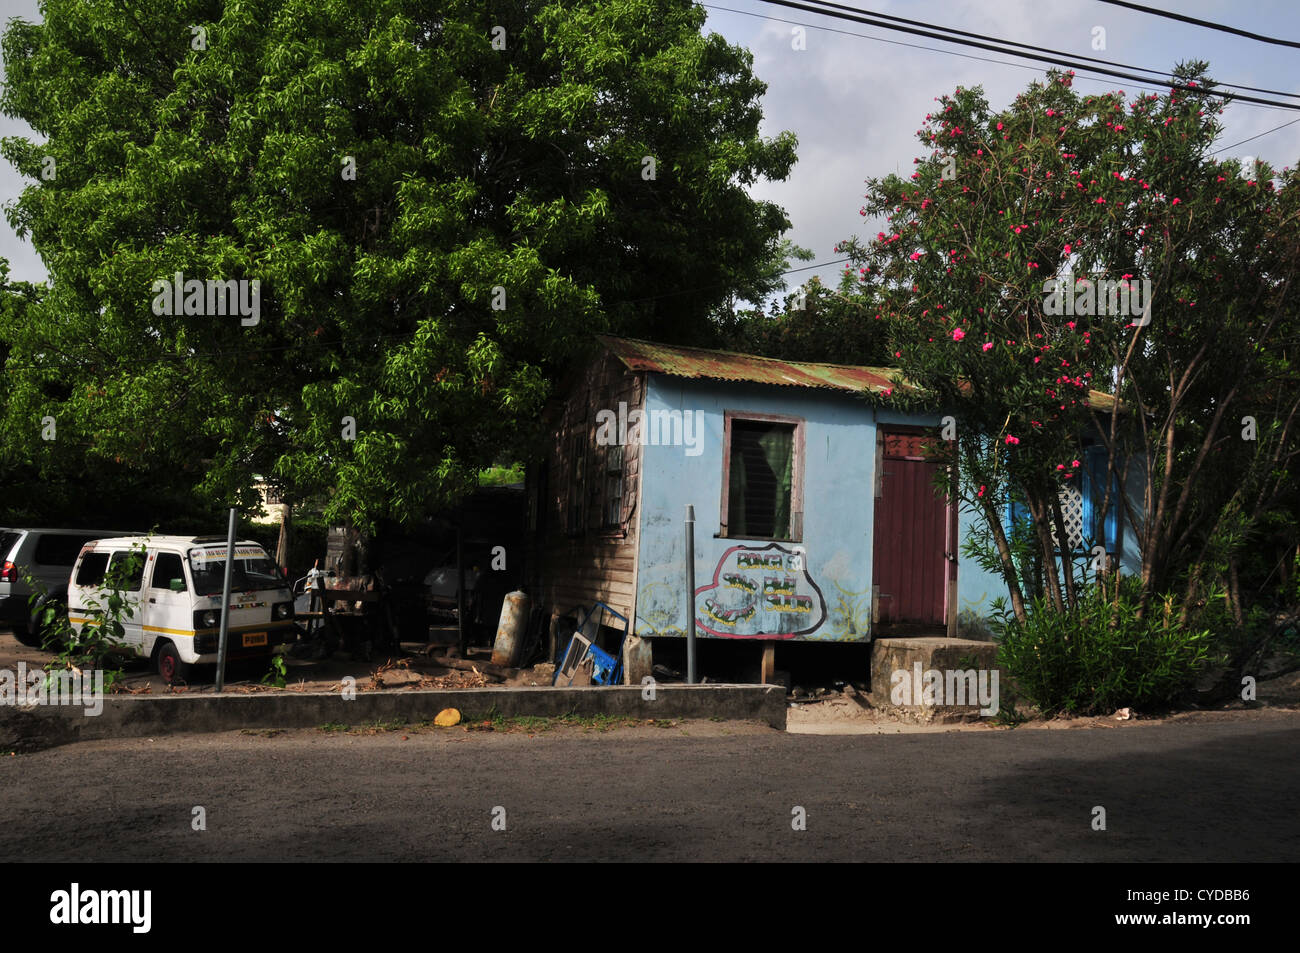 Cars parked yard, small wood house 'Bonga's Blue Studio', pink flowers tree, Belair Road, Hillsborough, Carriacou, West Indies Stock Photo